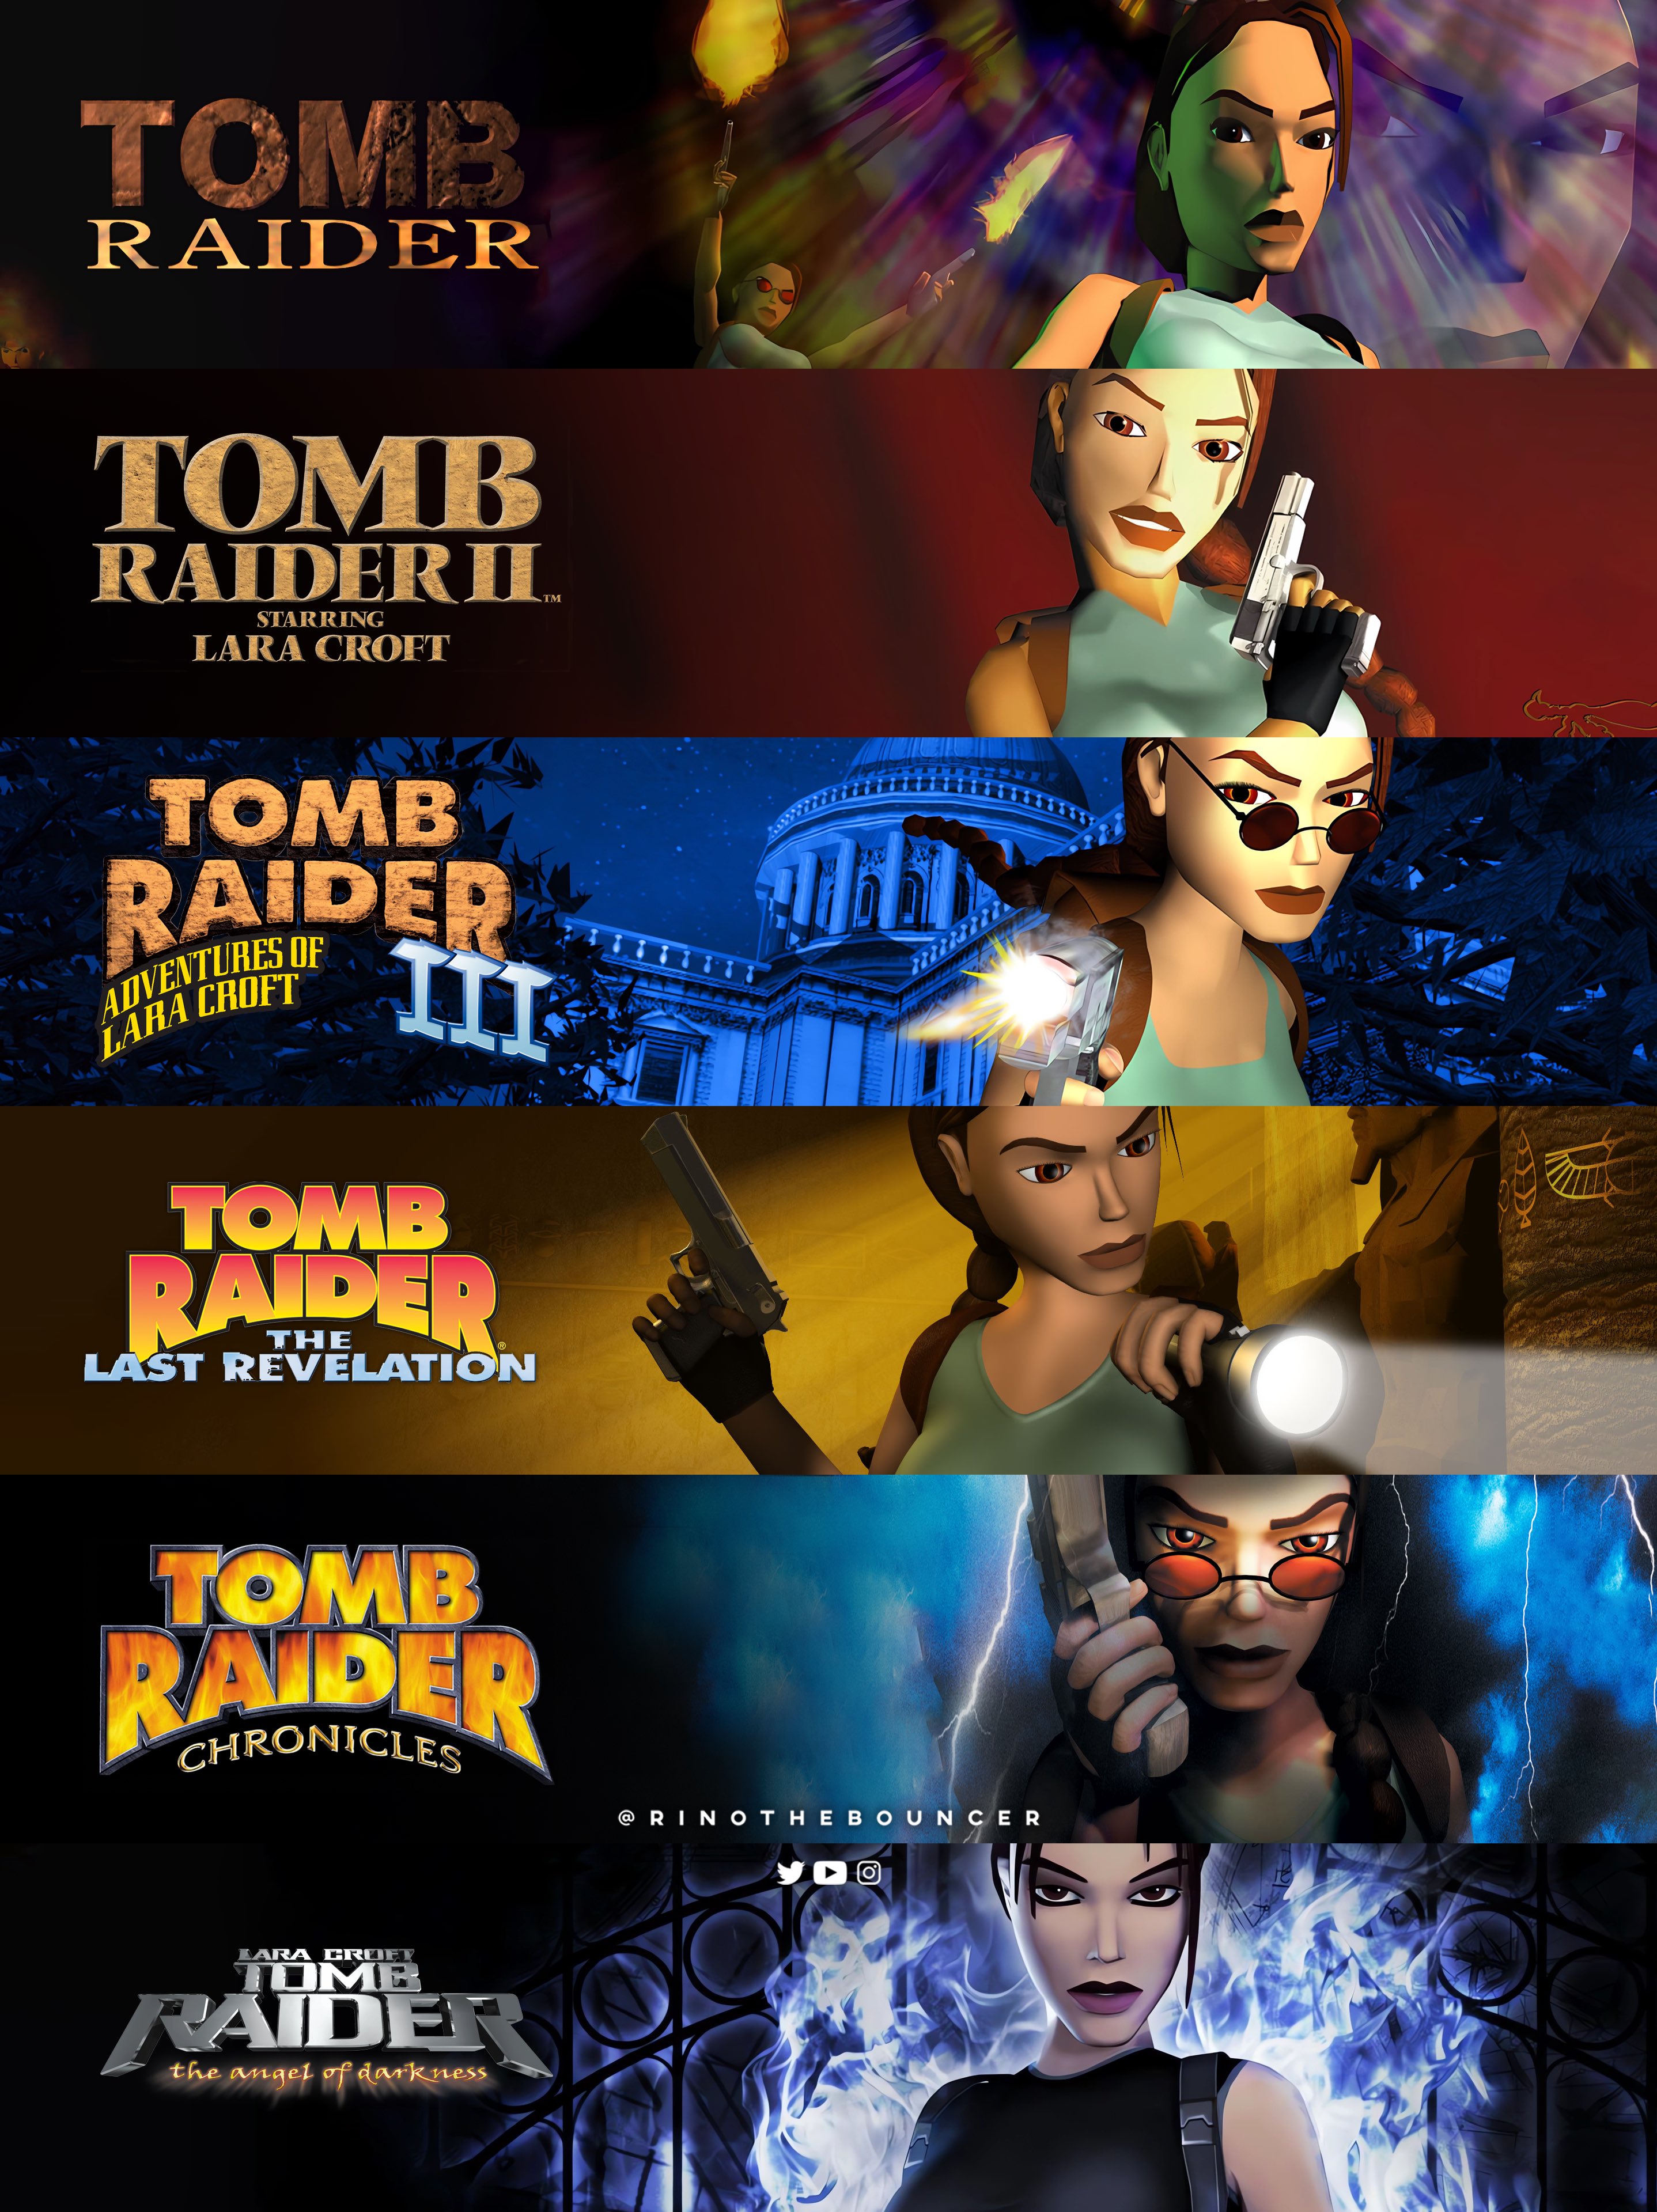 tomb runner : r/AwesomeOffBrands